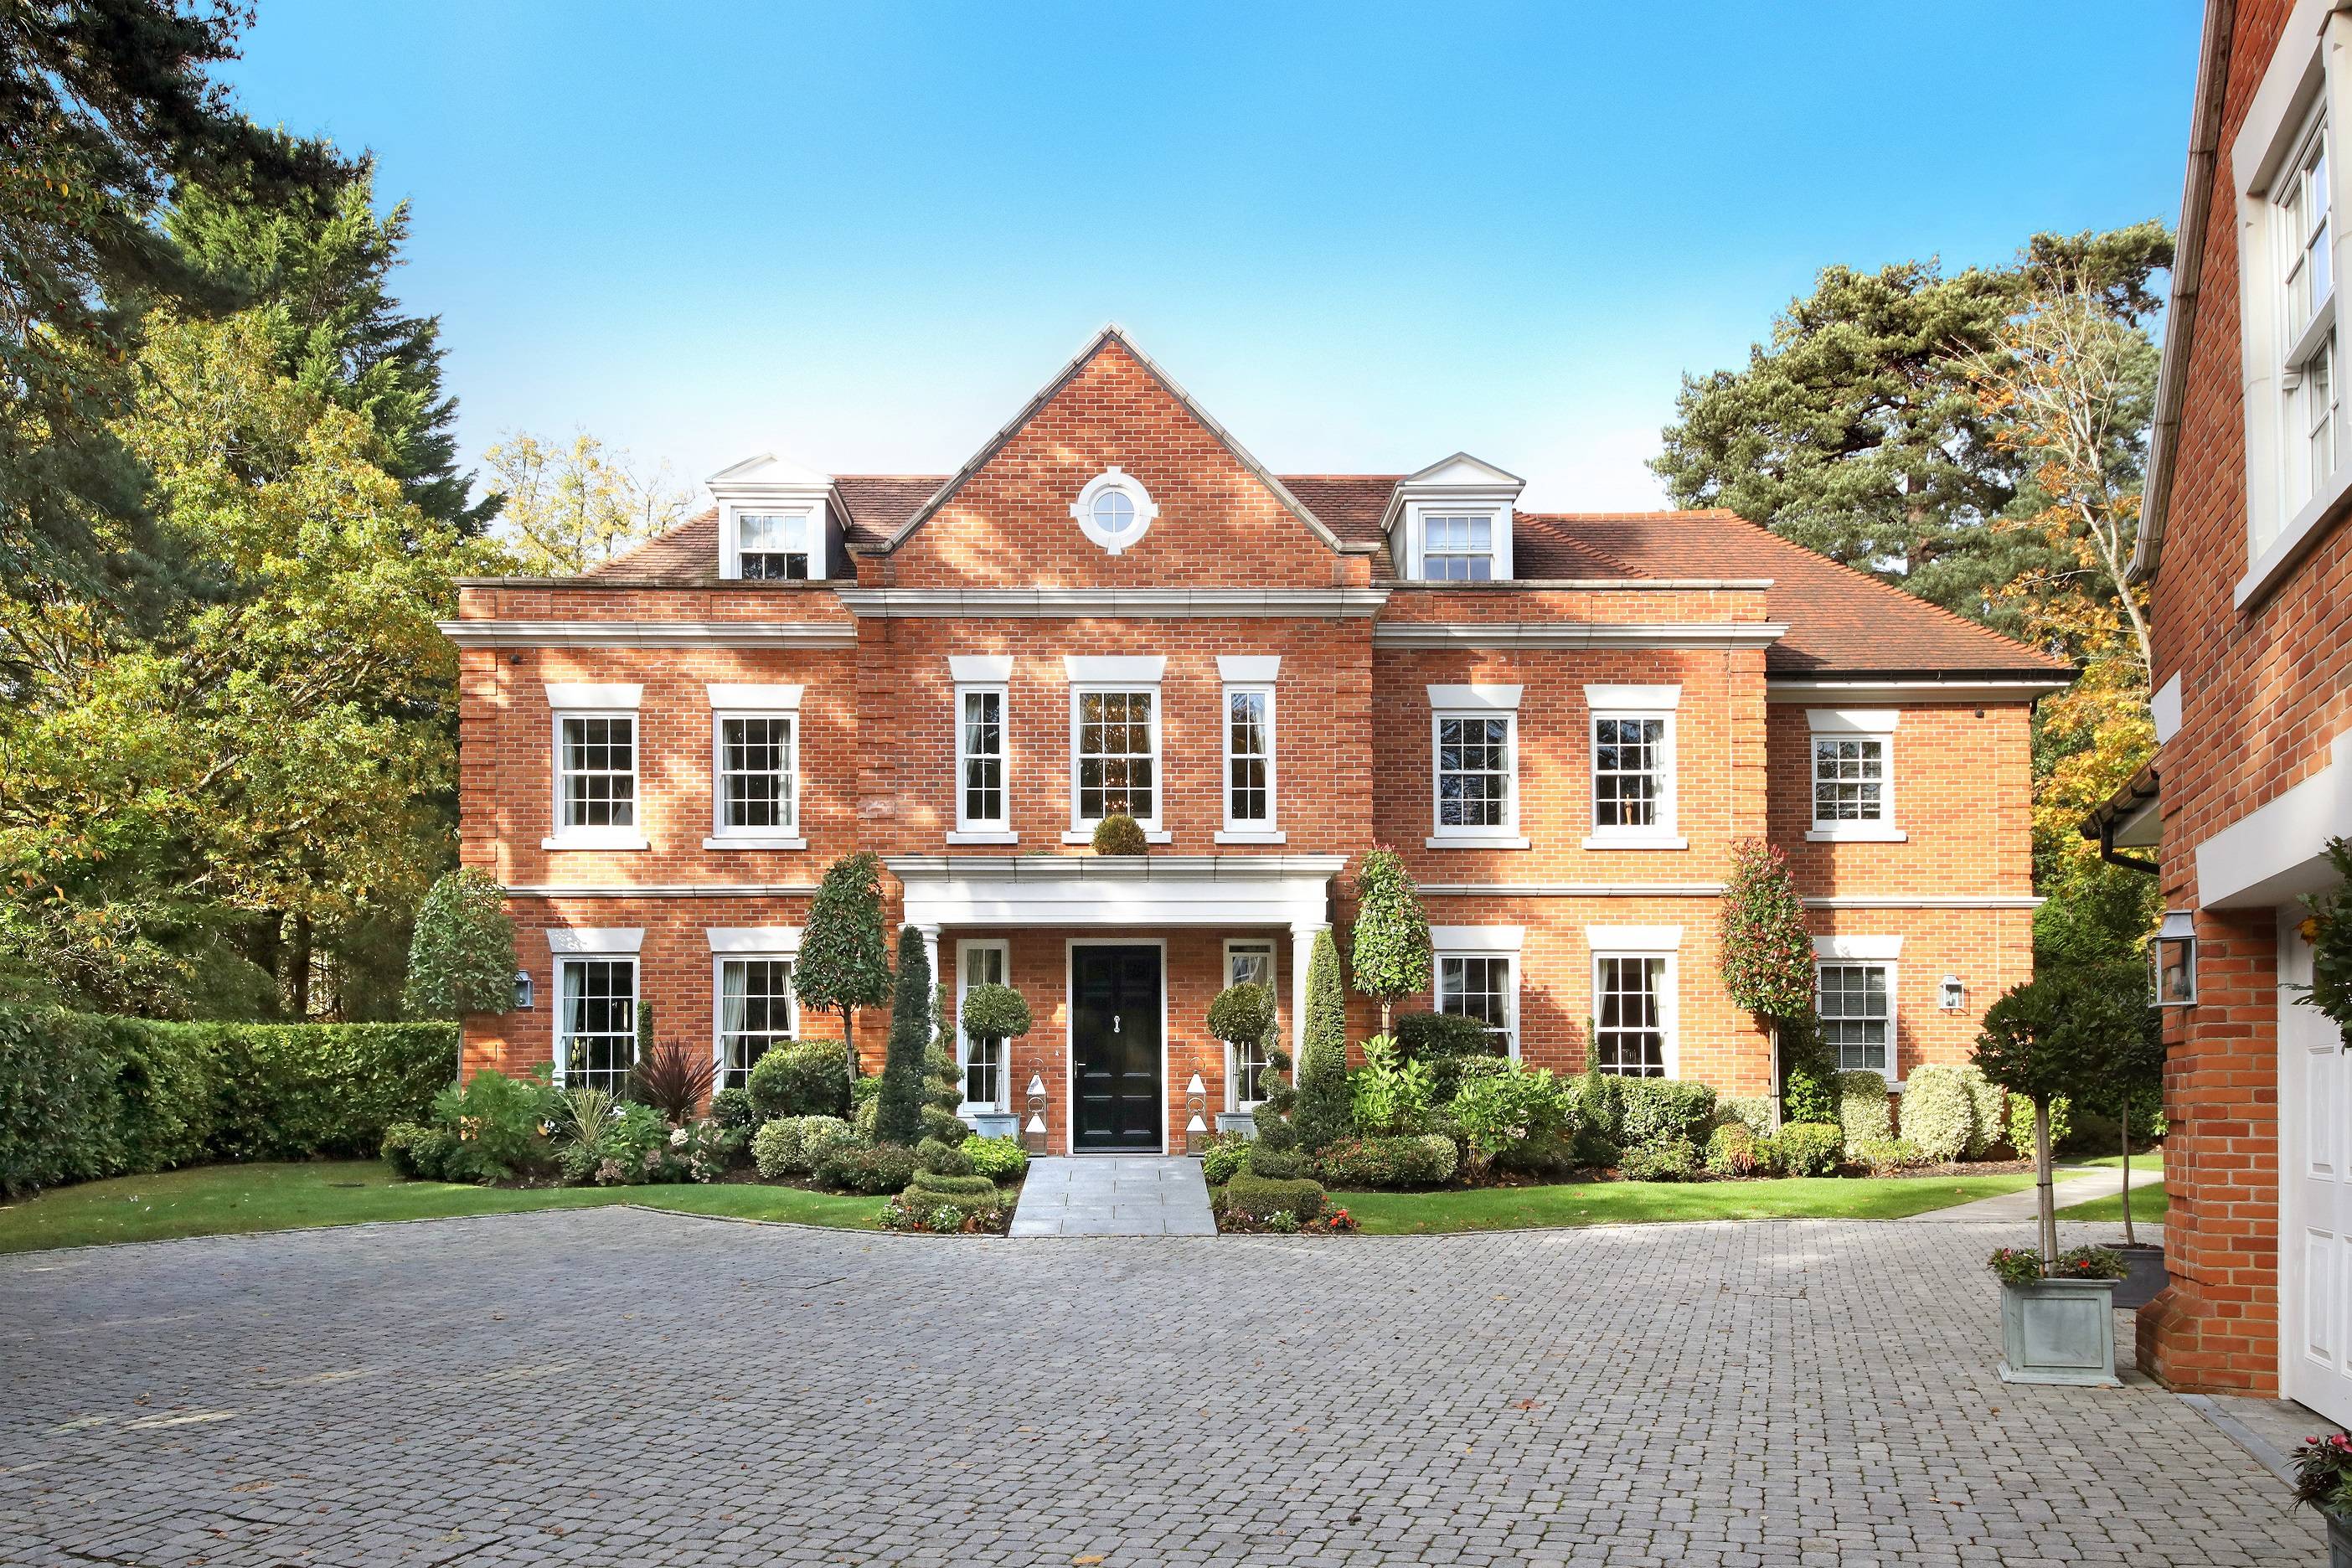 Winner Takes All - Exceptional Ascot Mansion